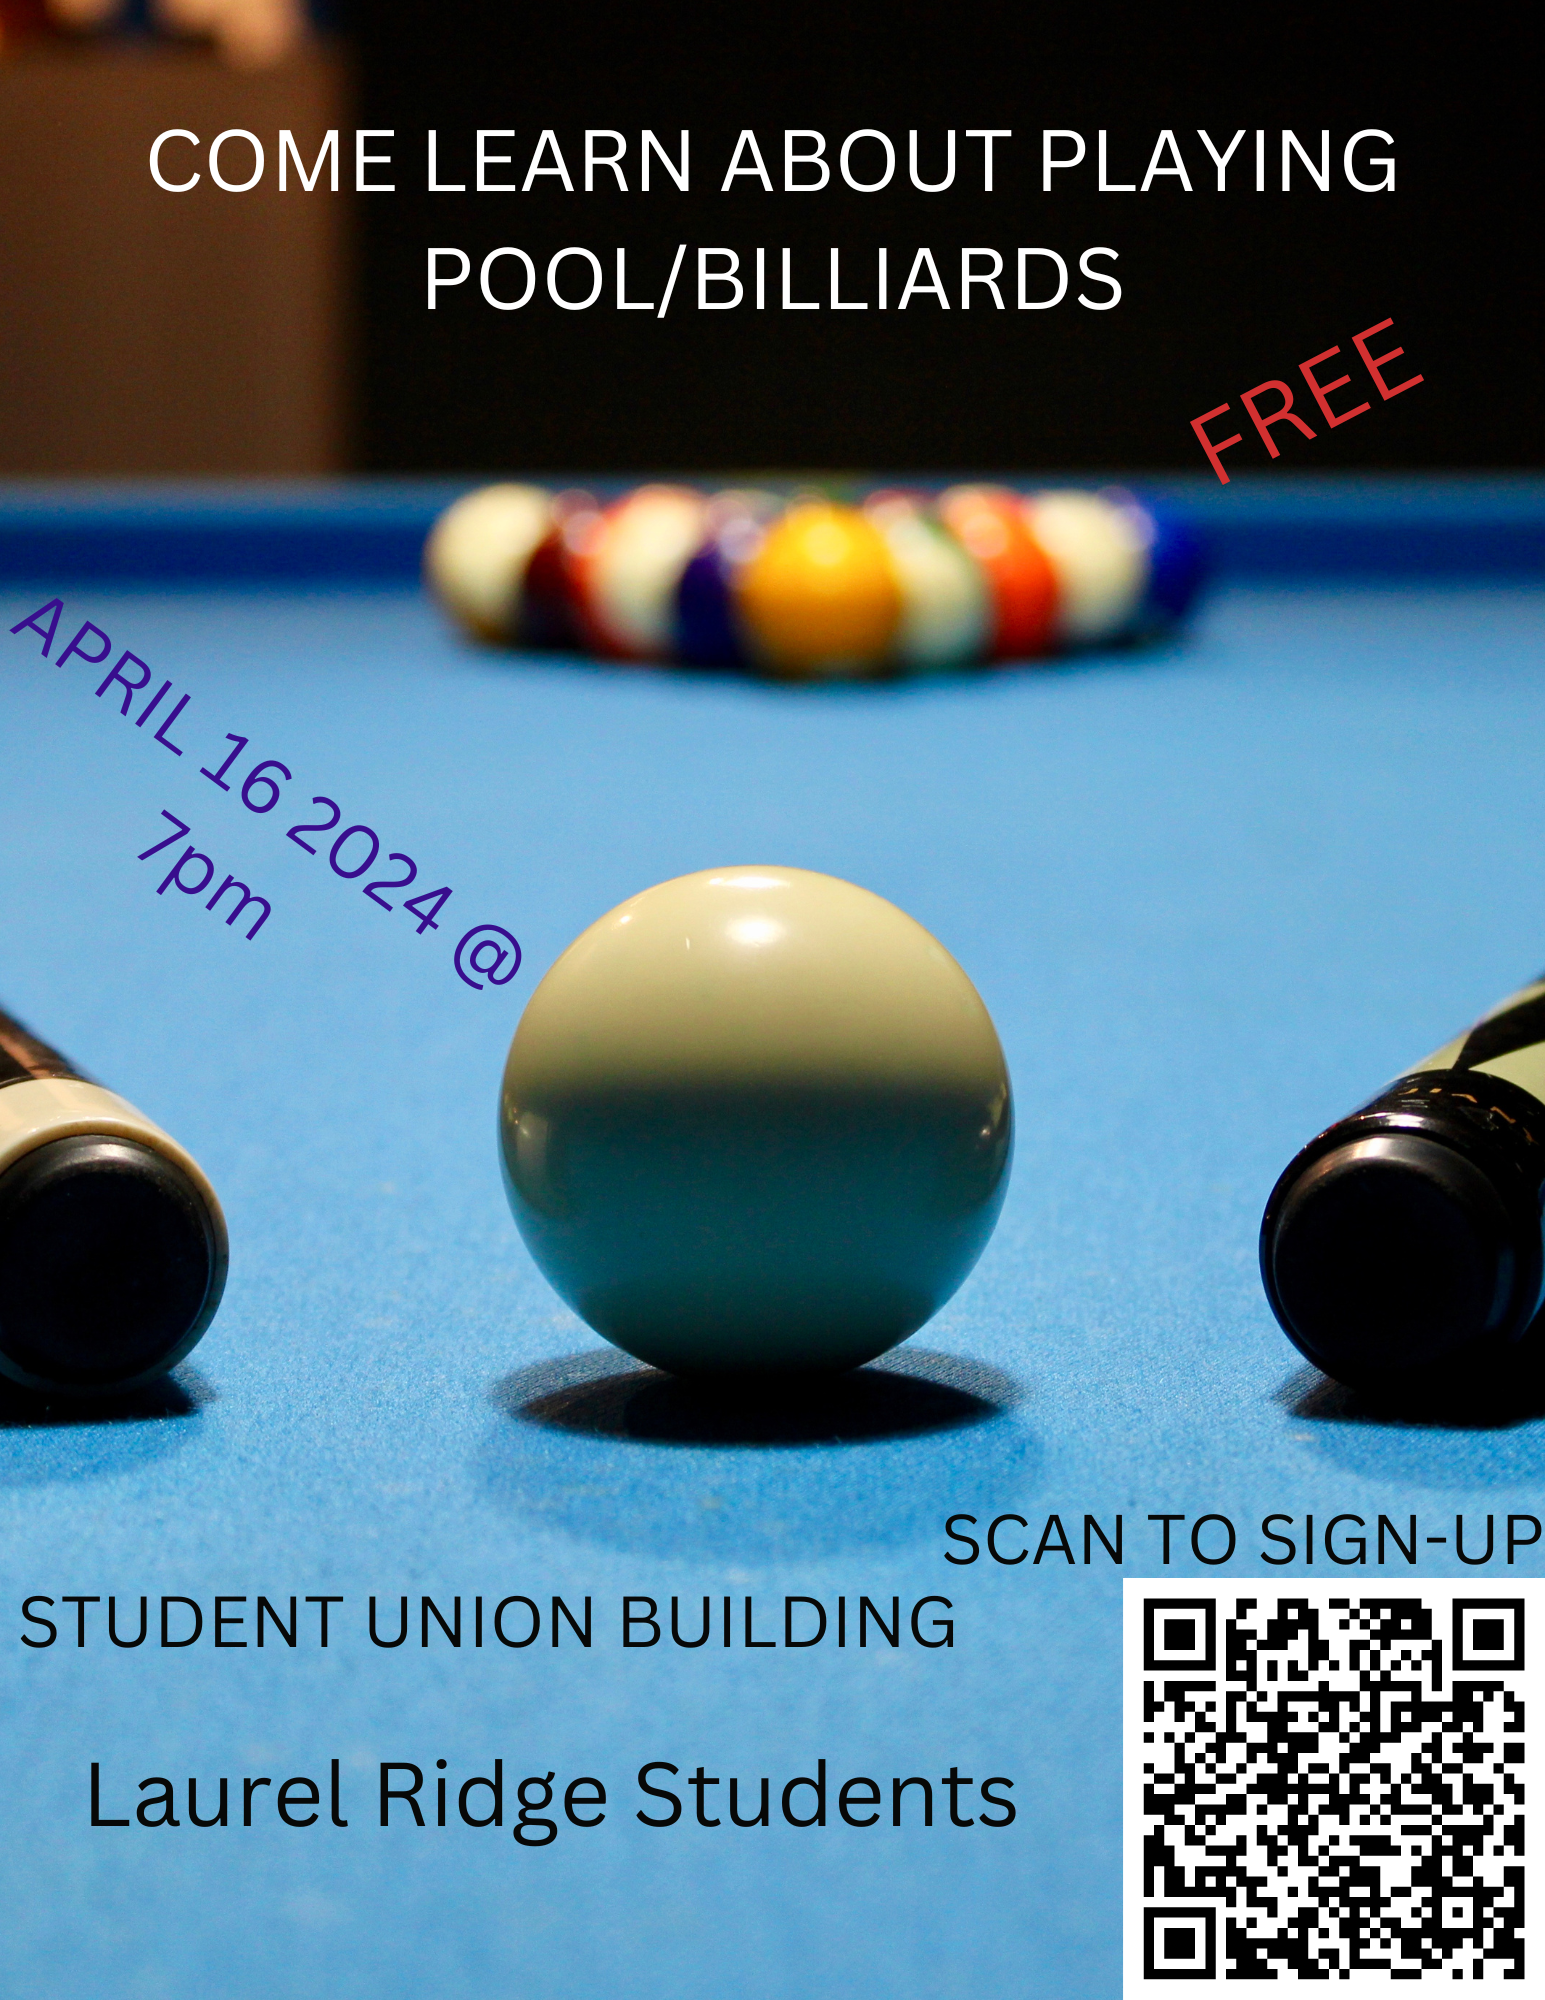 COME LEARN ABOUT PLAYING POOL flyer